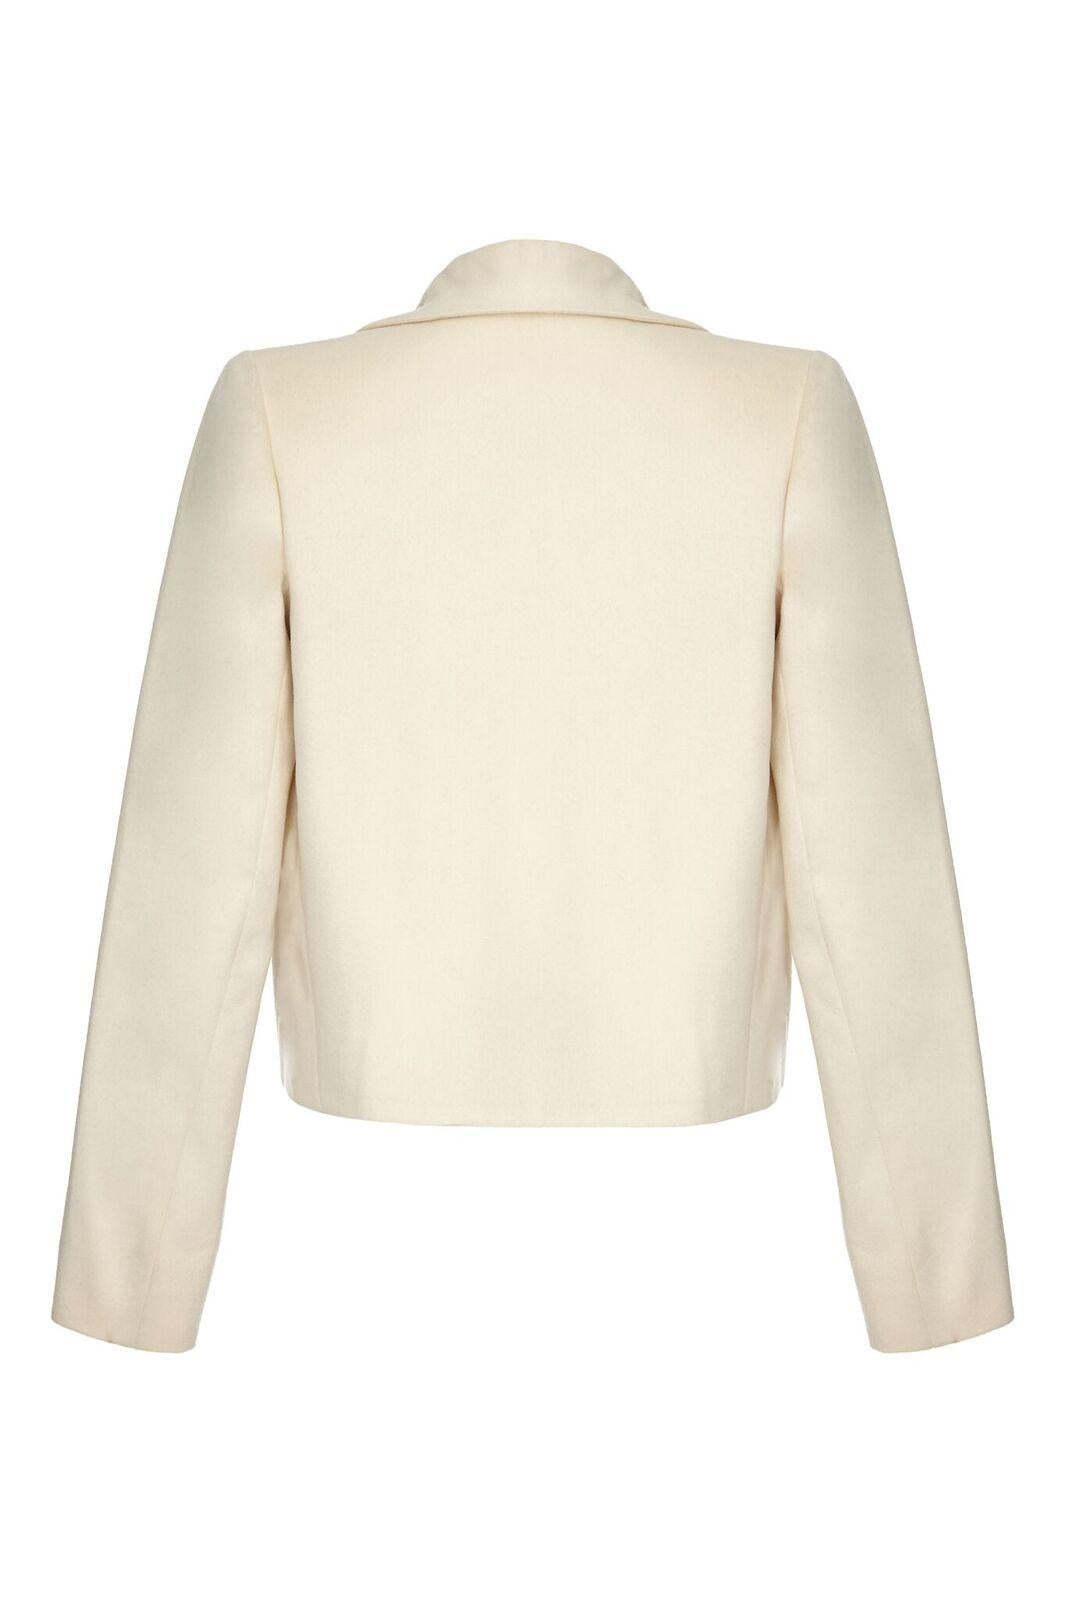 This stylish cashmere structured jacket in warm ivory is by Tom Ford for Yves Saint Laurent circa 1999. Designed to be worn open, the jacket has a wide set, New Look style wing lapel which graduates seamlessly into the centre line to create a deep